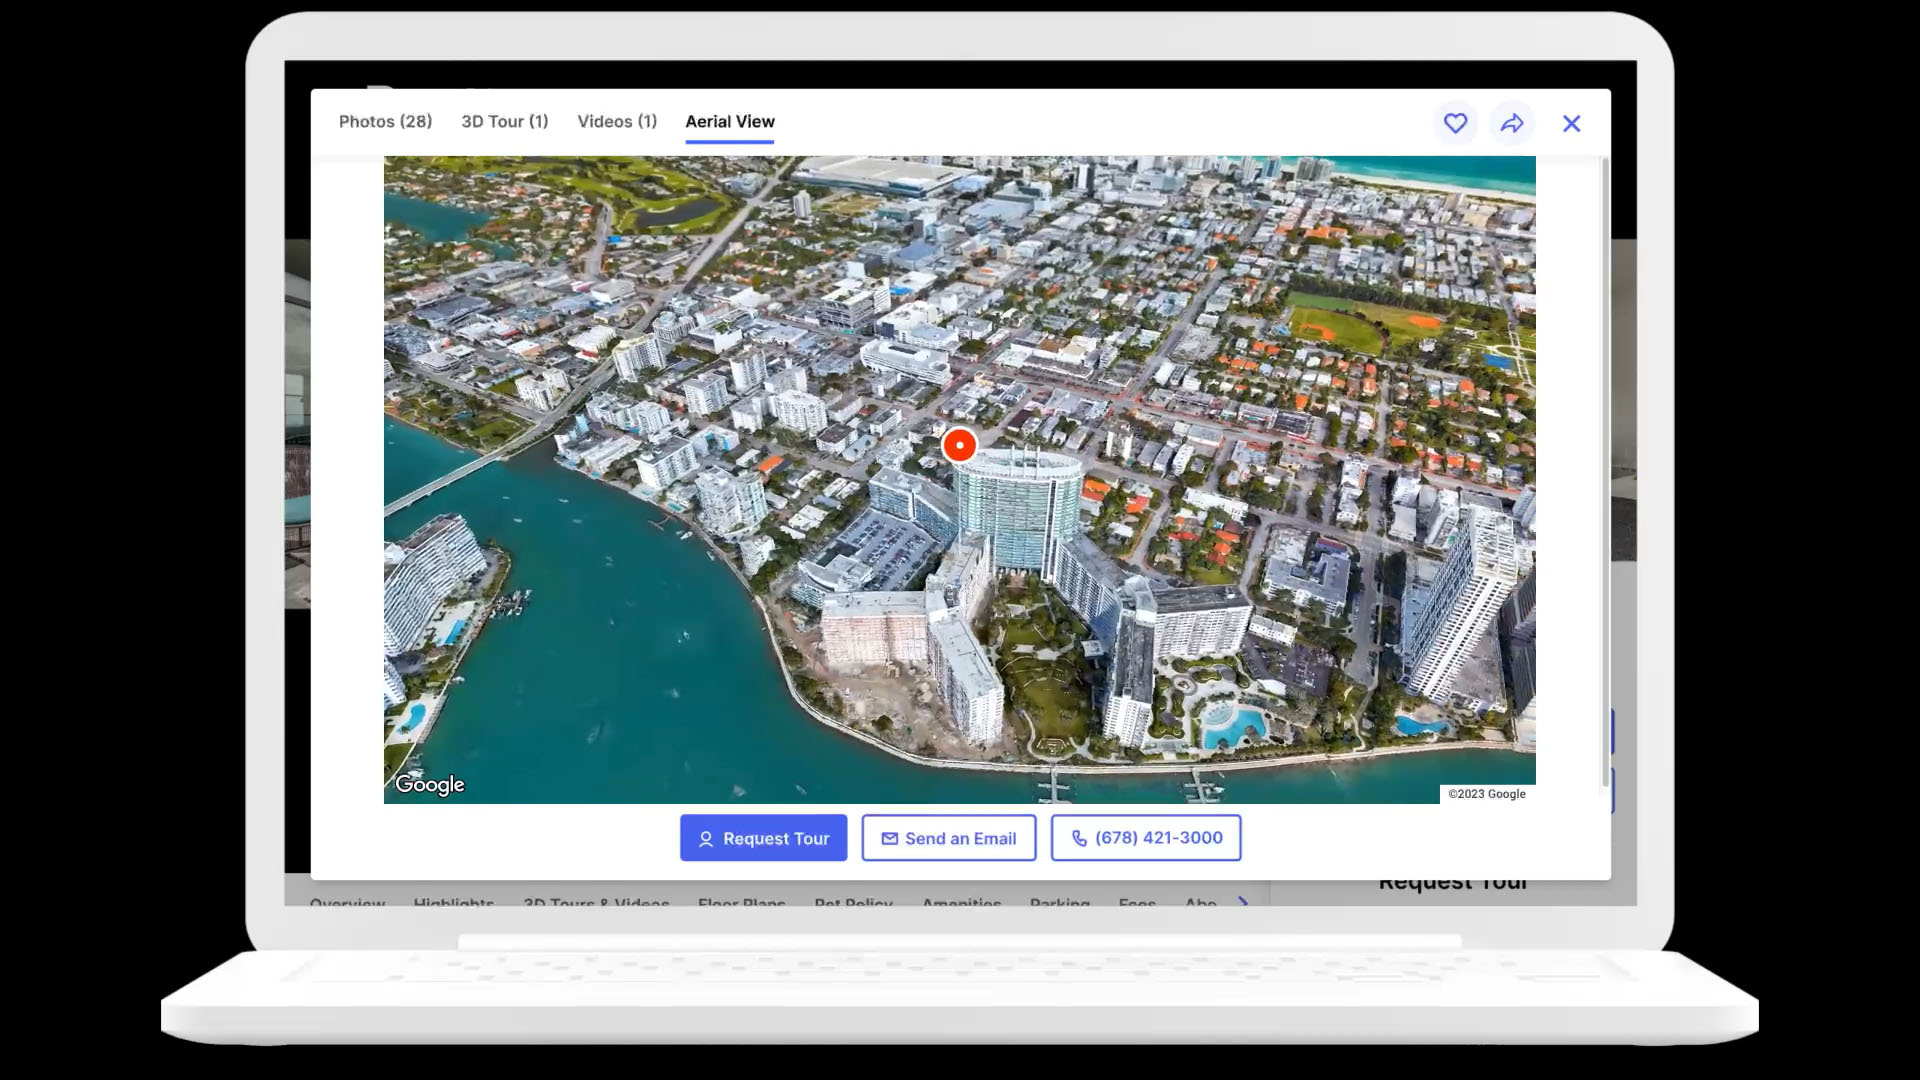 With the introduction of Google Maps Platform’s Aerial View, renters can now experience a captivating 3D cinematic perspective, offering a bird’s-eye view of a community. This functionality is optimized for both mobile and desktop use.